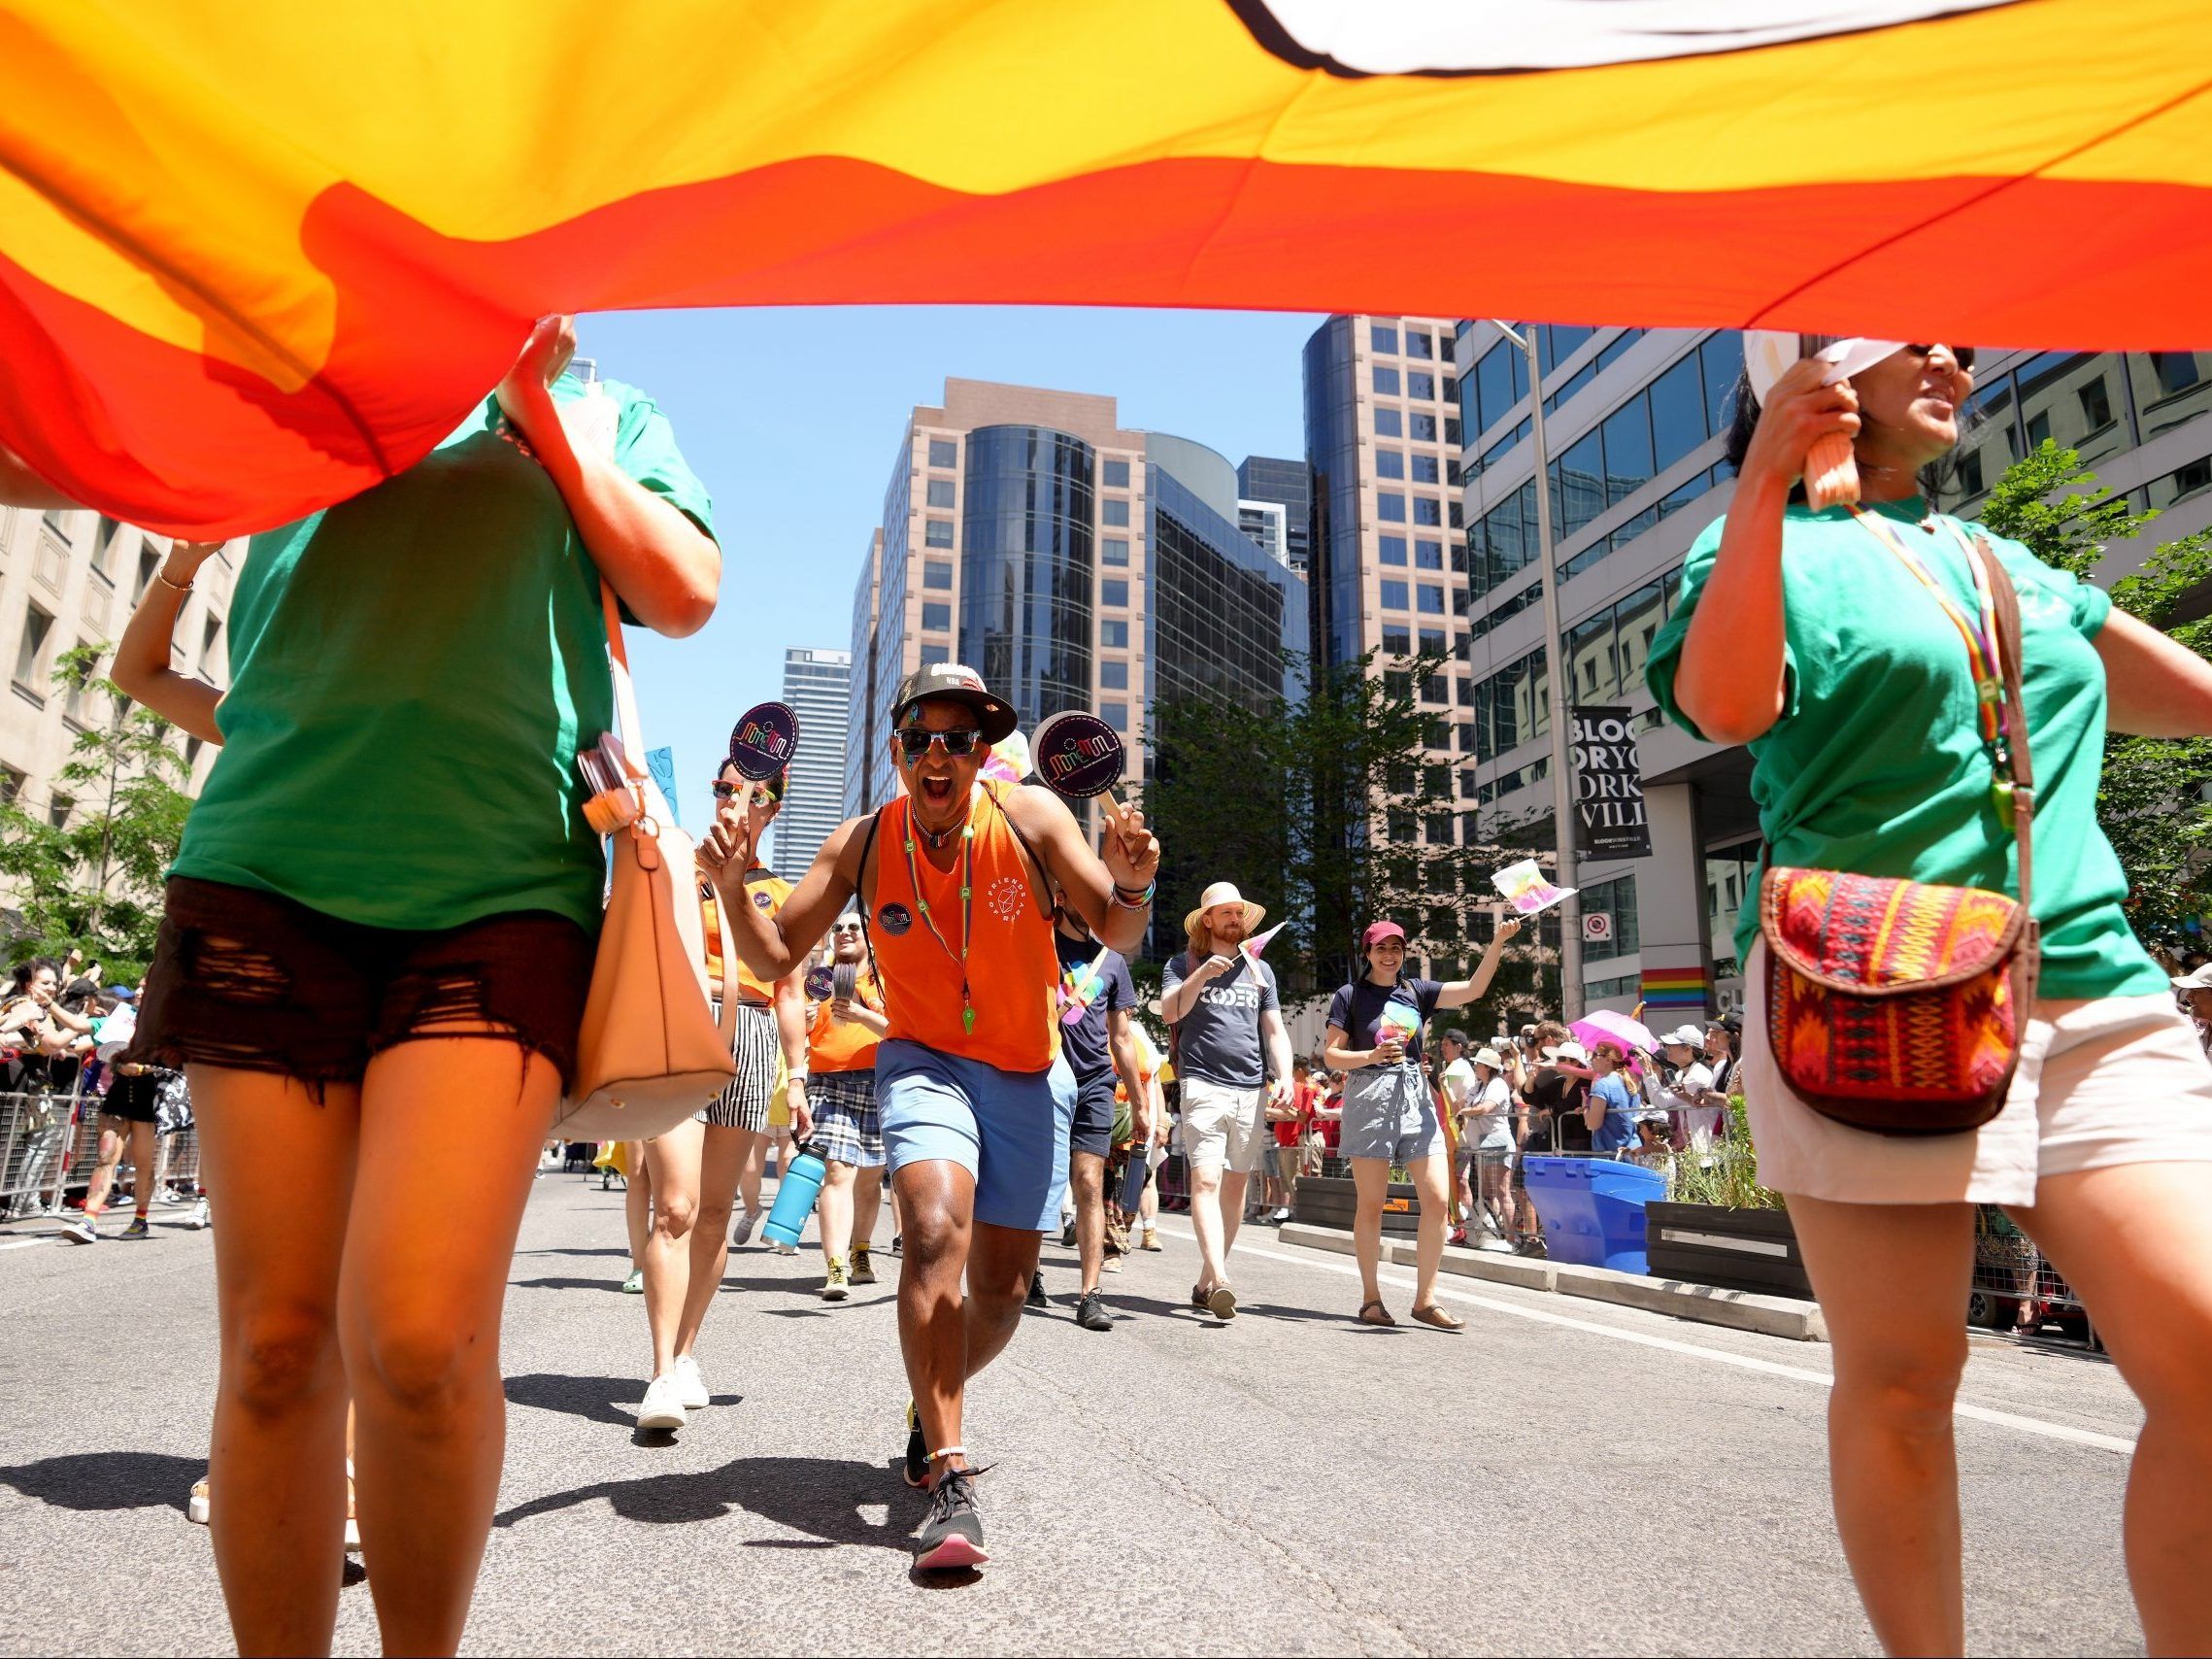 Are Torontonians proud there are naked marchers in Pride? Toronto